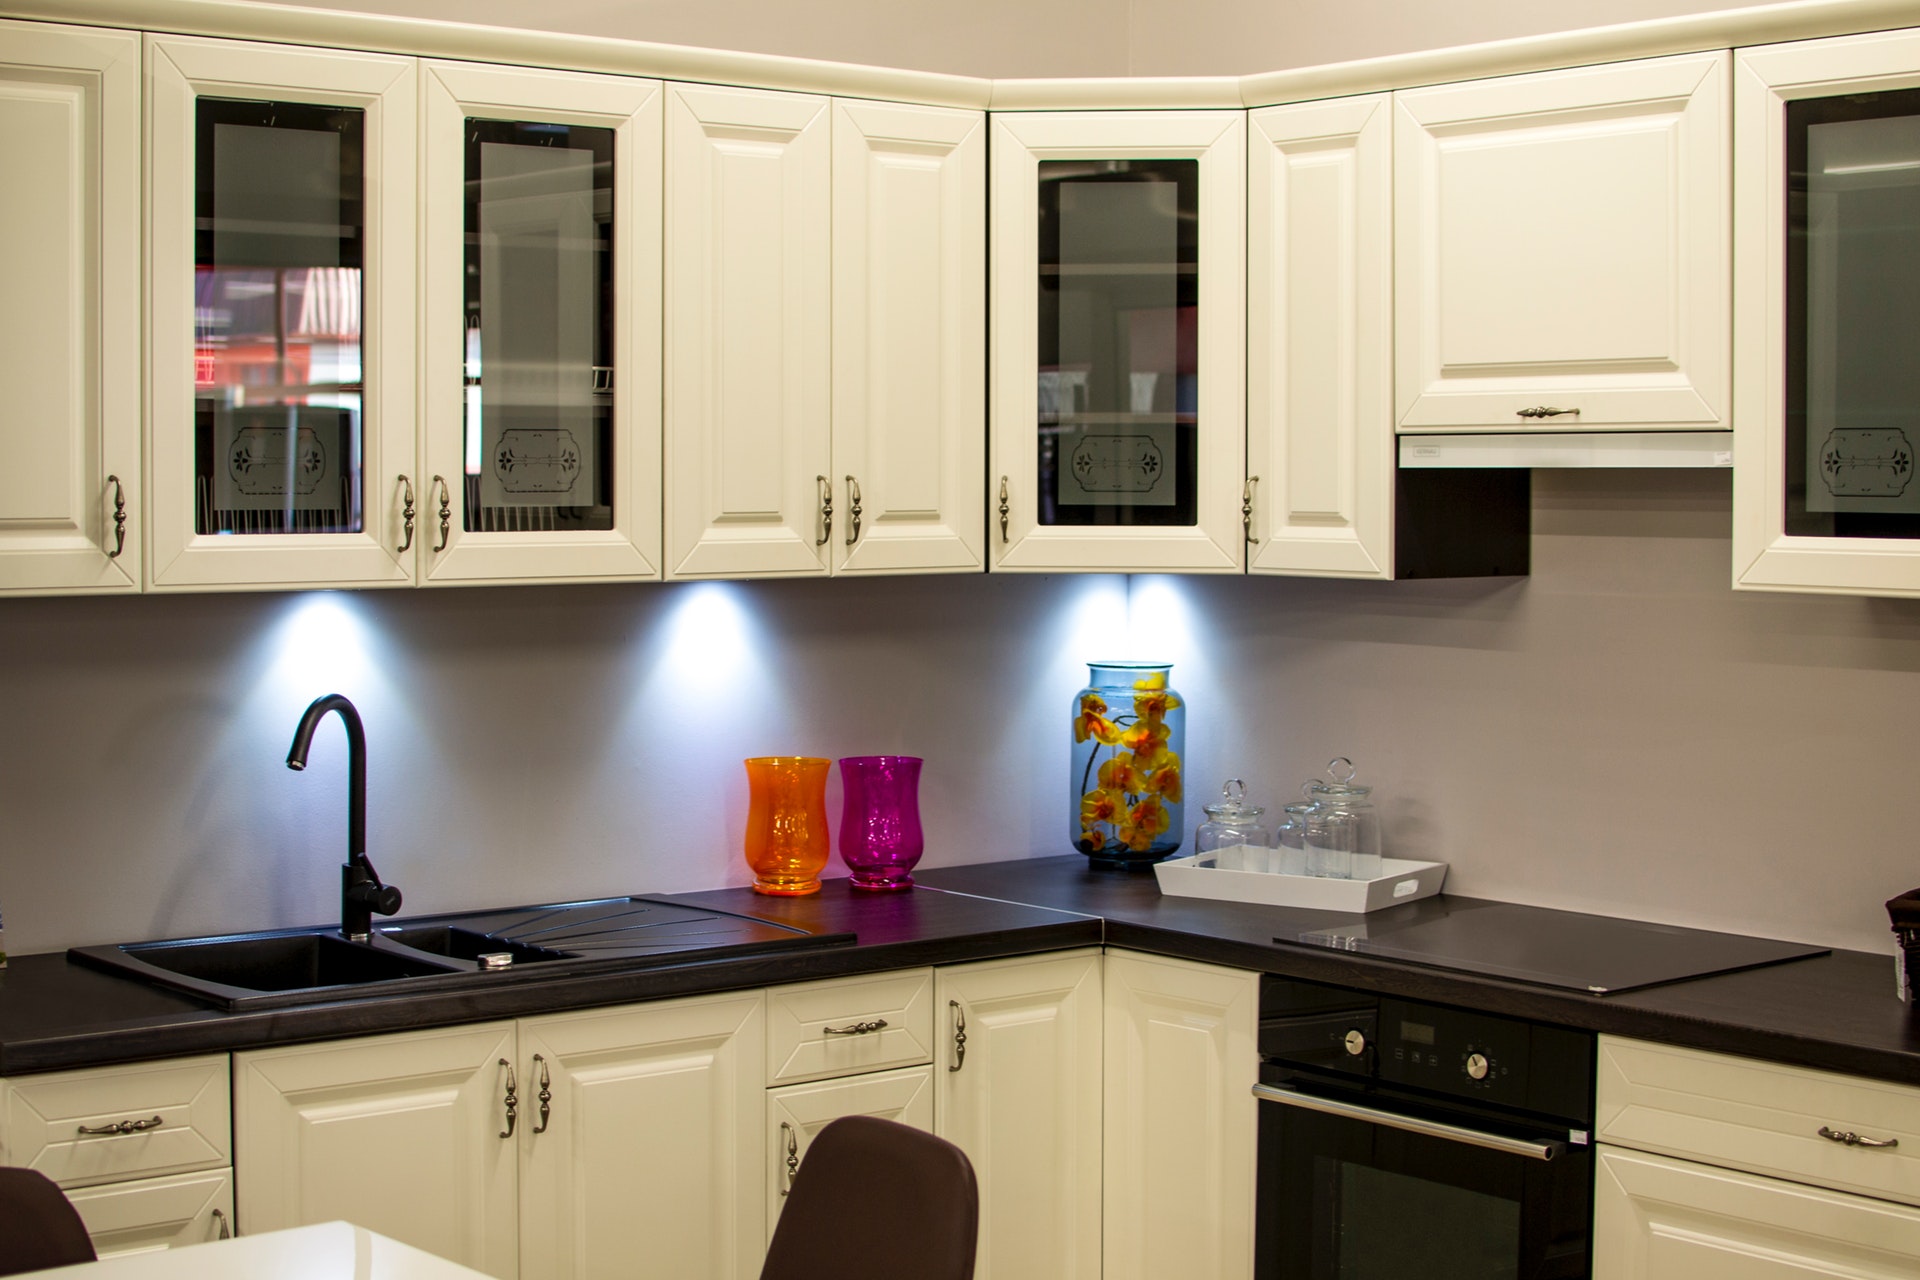 Kitchen Cabinet Options: Install, Reface or Refinish